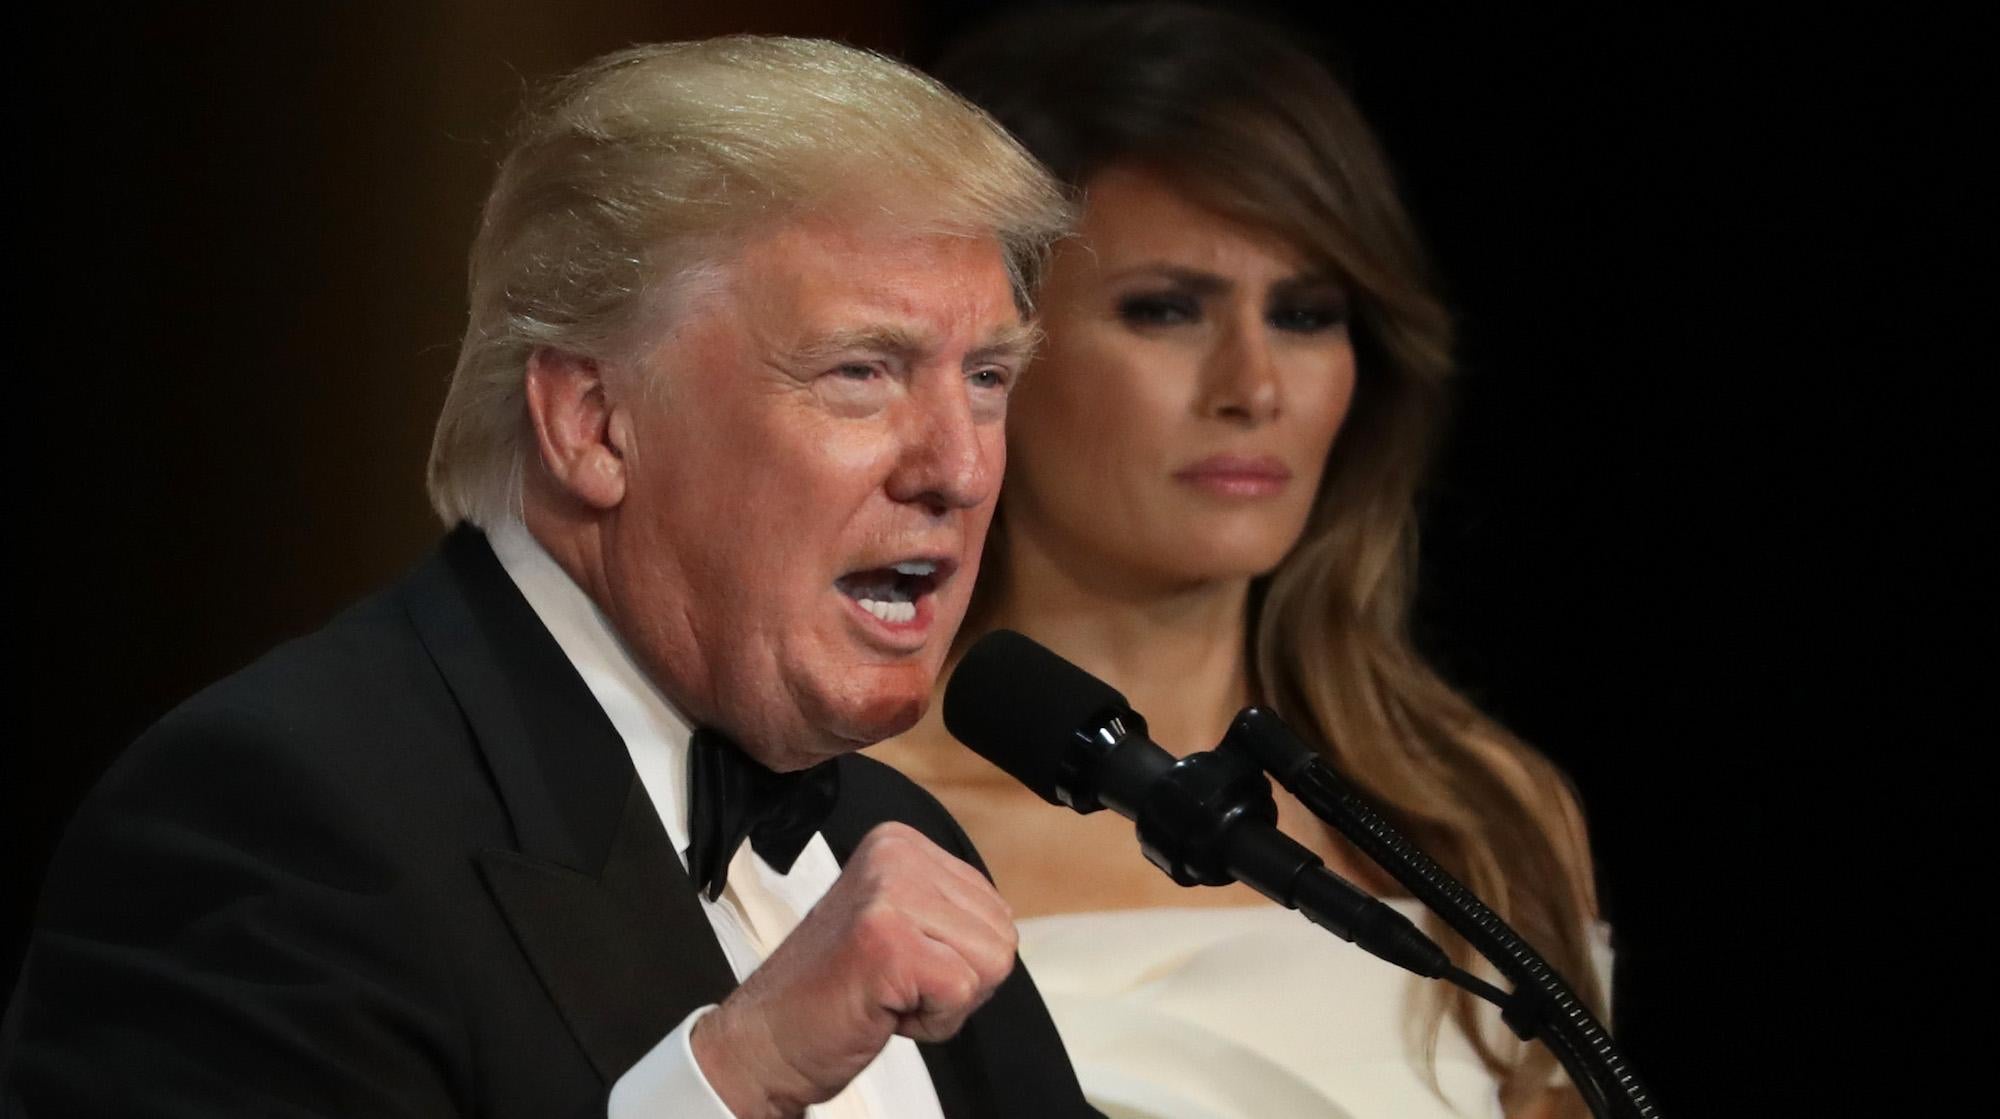 Donald Trump speaks as his wife First Lady Melania Trump looks on during A Salute To Our Armed Services Inaugural Ball at the National Building Museum on January 20, 2017 in Washington.